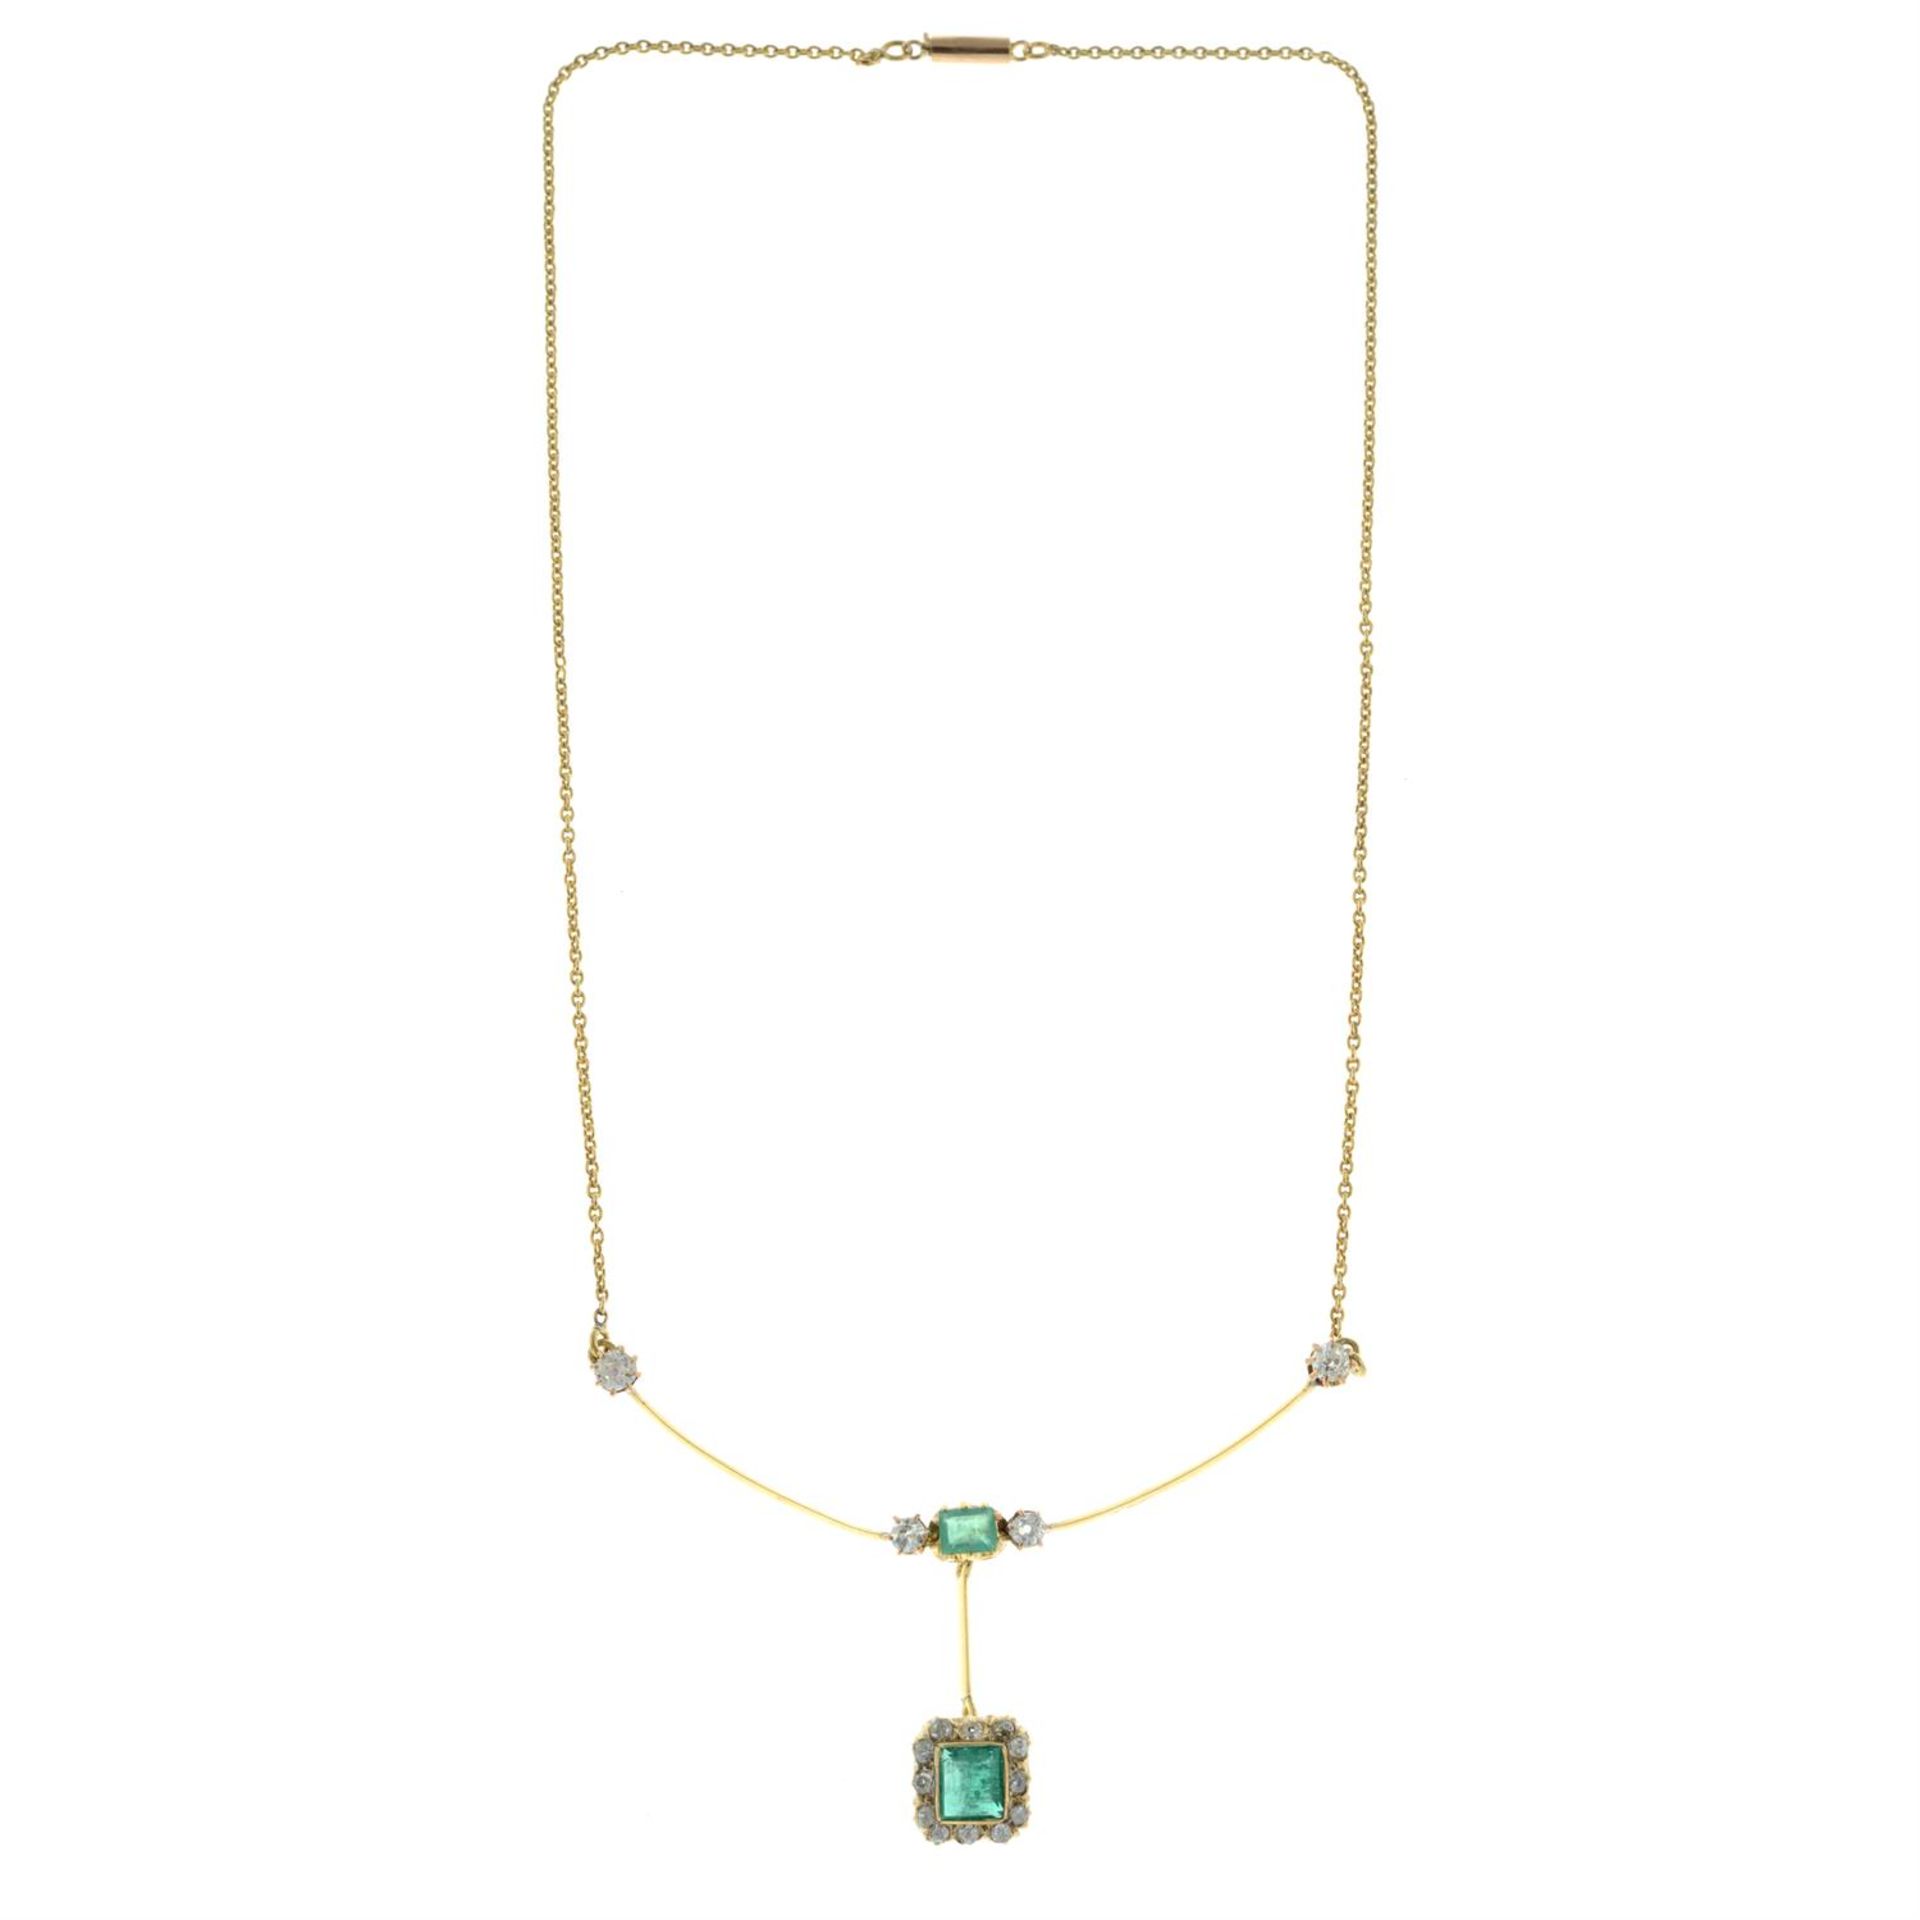 An emerald and diamond articulated pendant, on integral chain. - Image 2 of 3